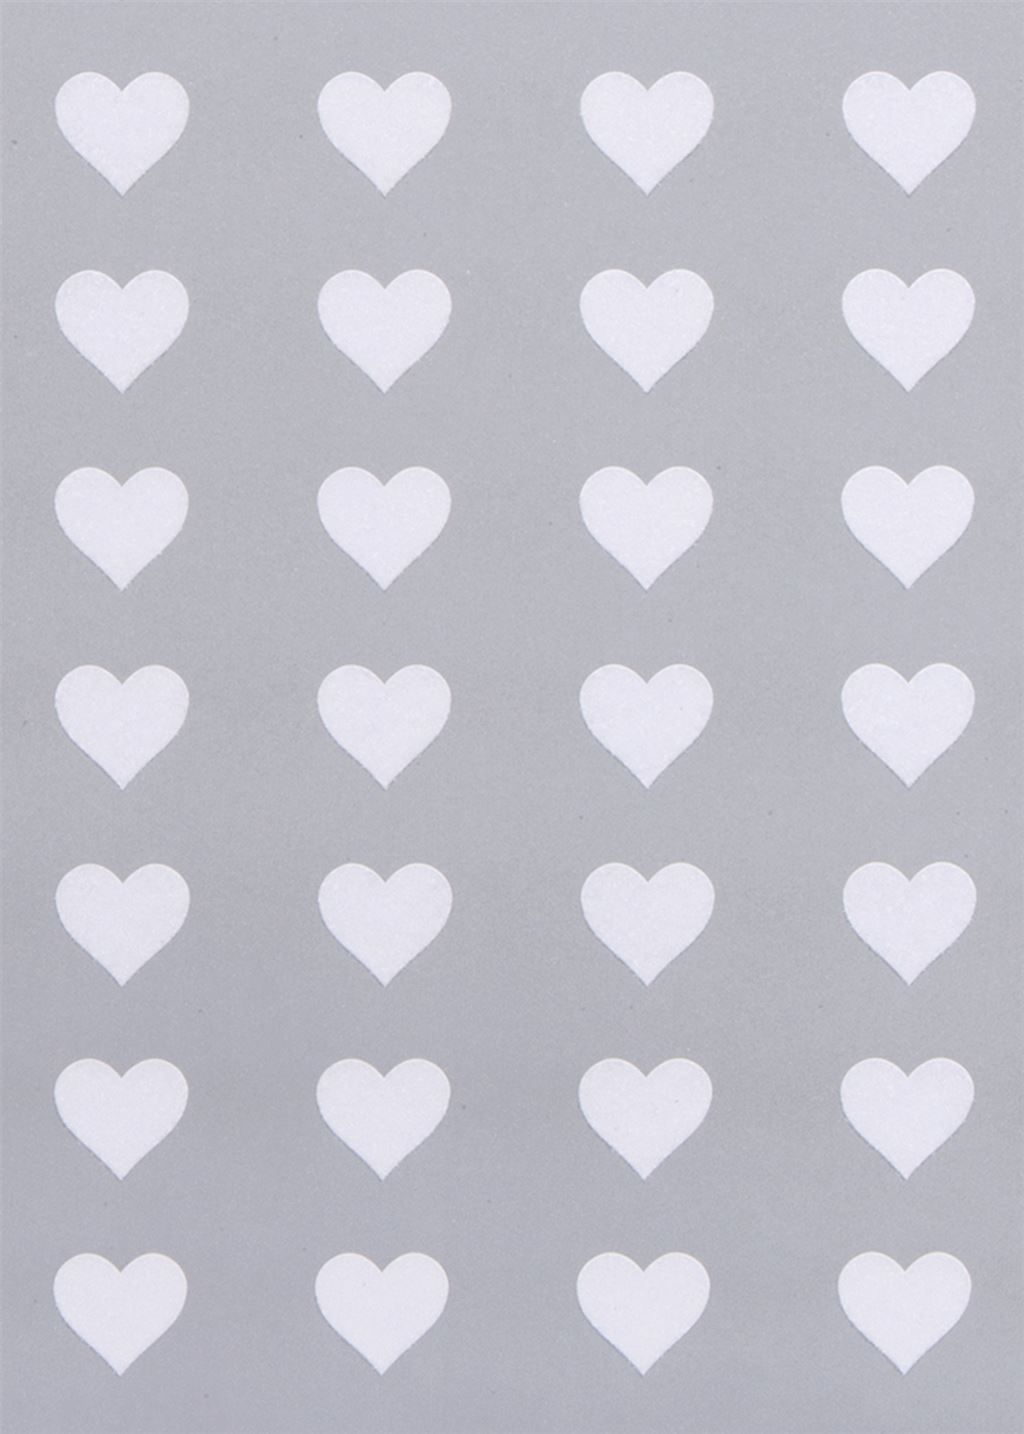 Silver/White Hearts Wrapping Paper - 2 SHEETS Of LUXURY Gift WRAP - RECYCLA